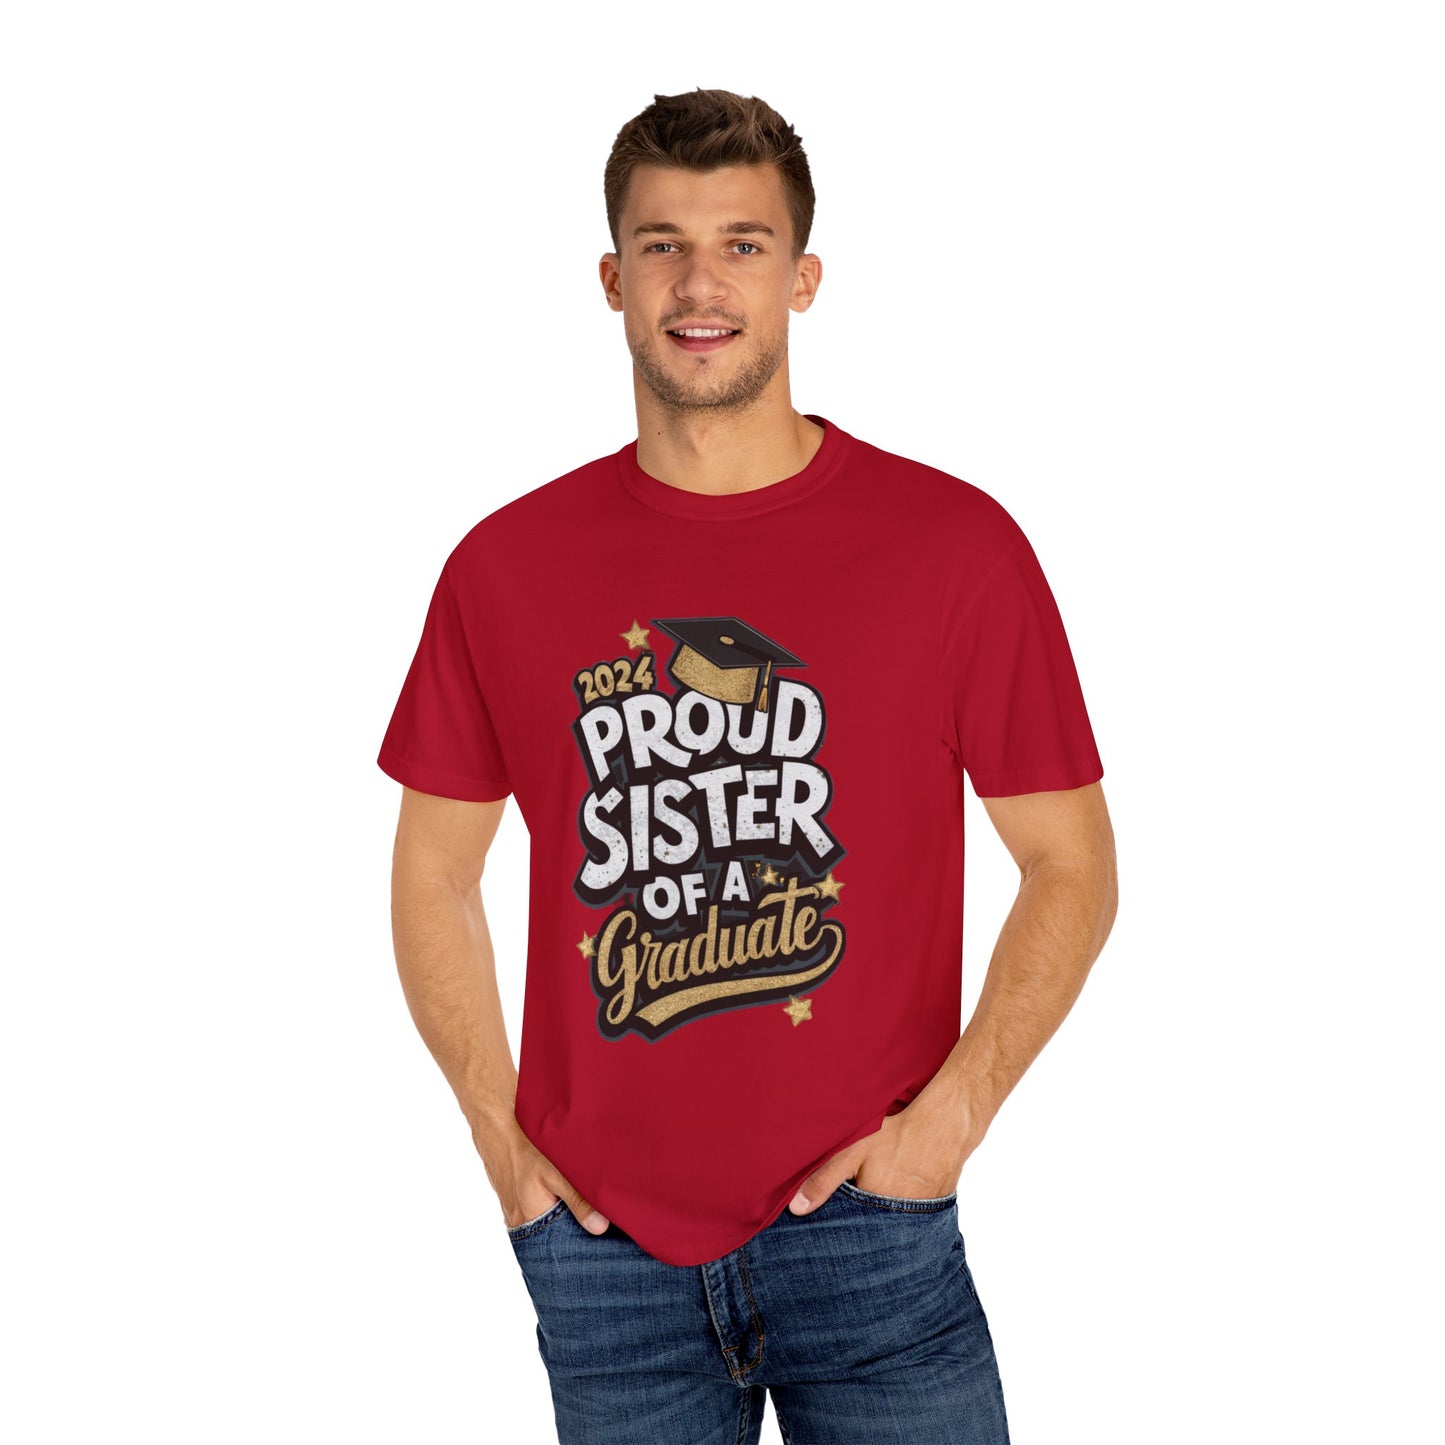 Proud Sister of a 2024 Graduate Unisex Garment-dyed T-shirt Cotton Funny Humorous Graphic Soft Premium Unisex Men Women Red T-shirt Birthday Gift-21